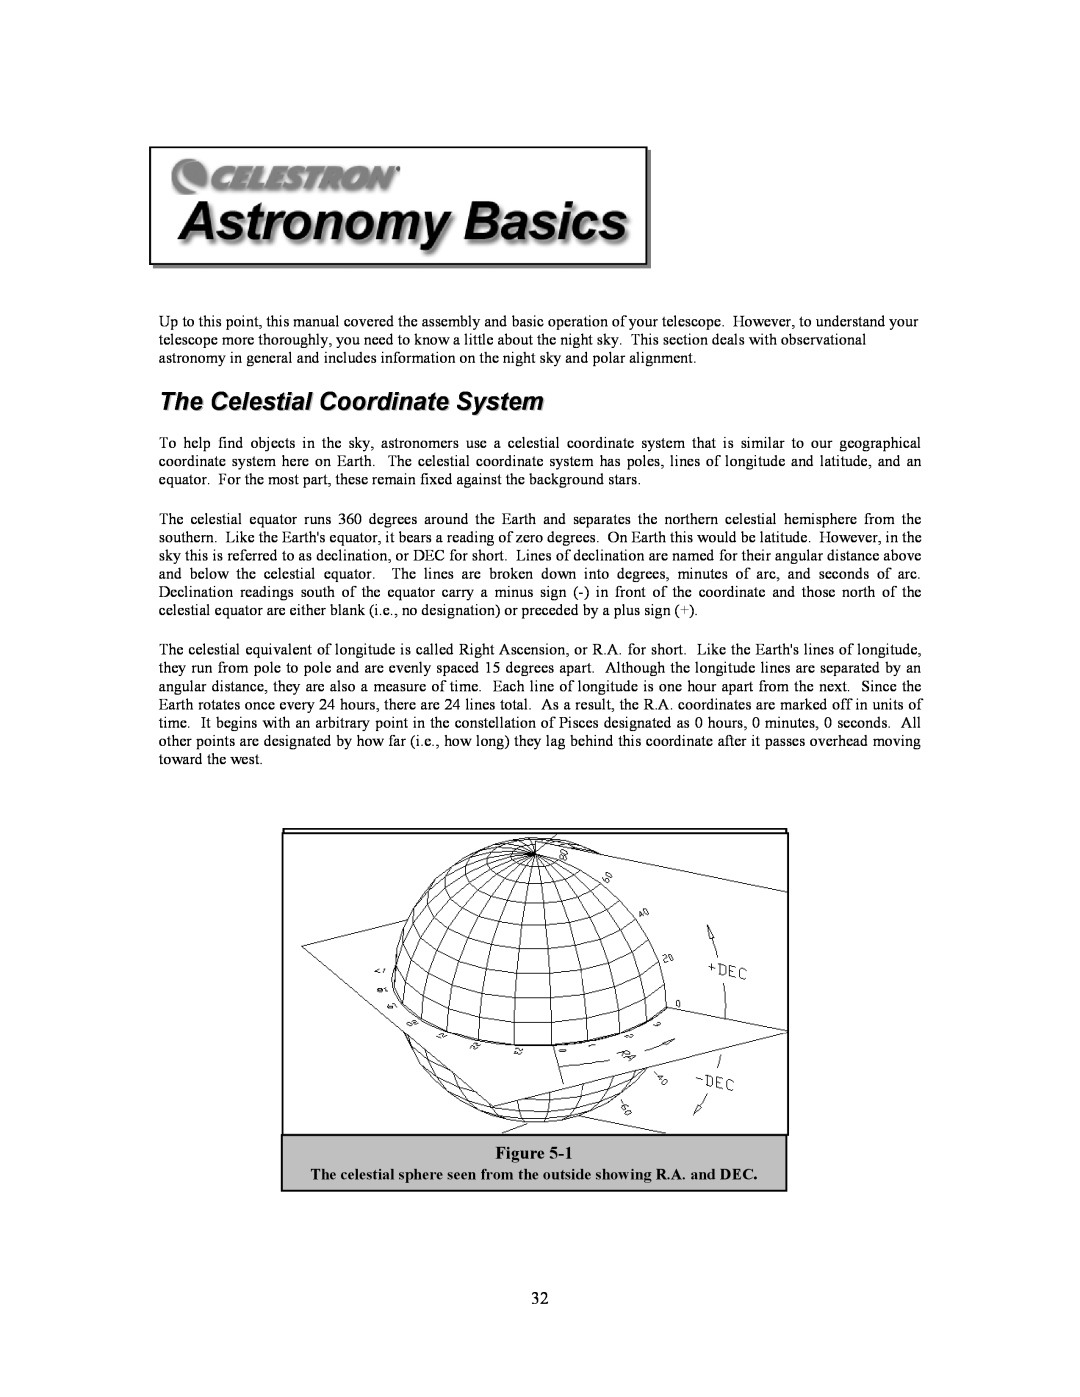 Celestron C10-N, C8-N The Celestial Coordinate System, The celestial sphere seen from the outside showing R.A. and DEC 